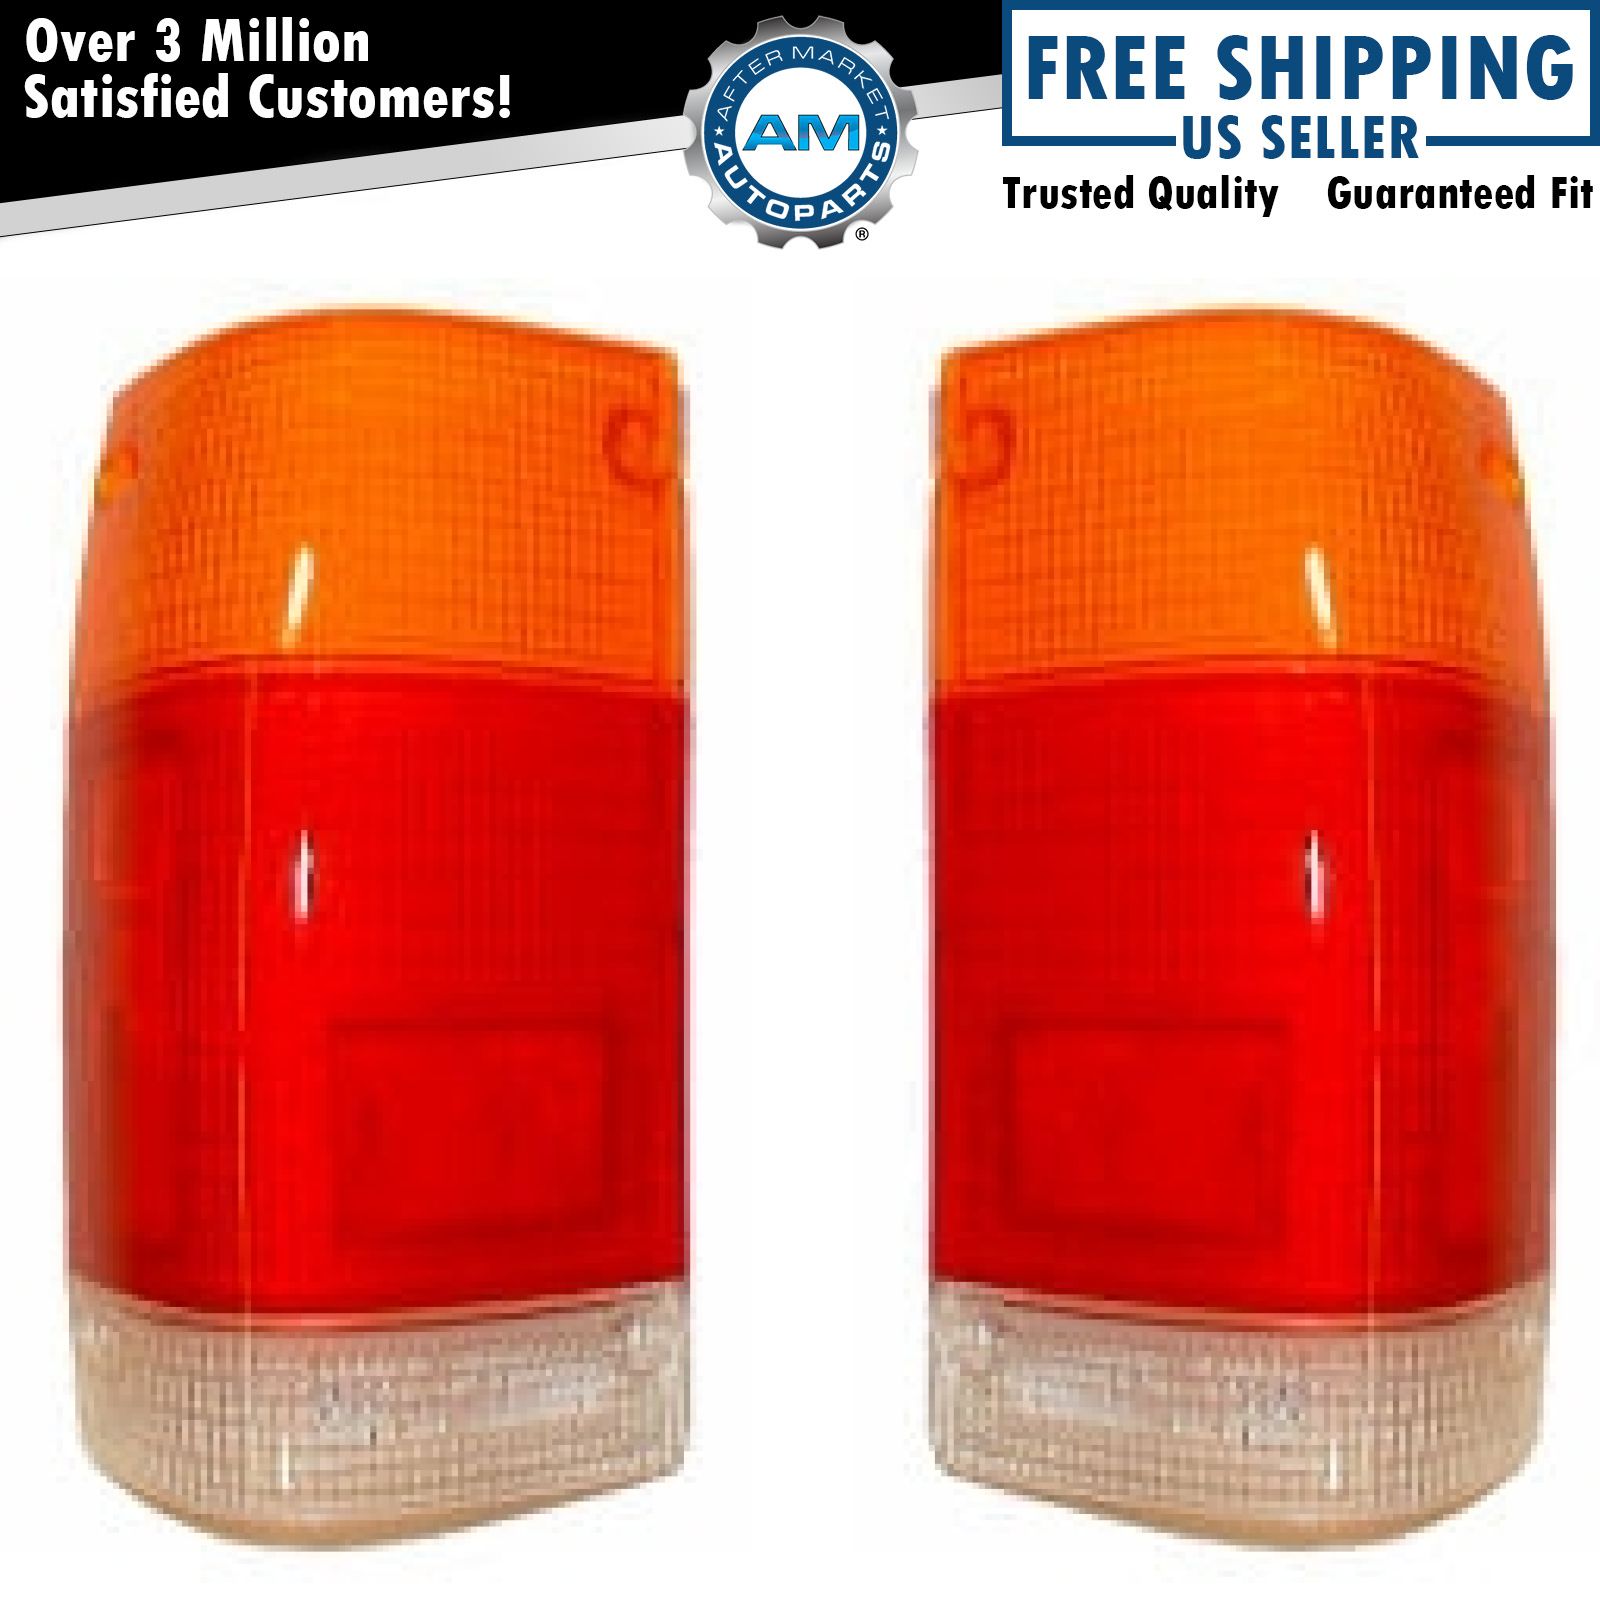 Taillights Taillamps Lens Only Pair Set for 86-93 Mazda Pickup Truck B Series